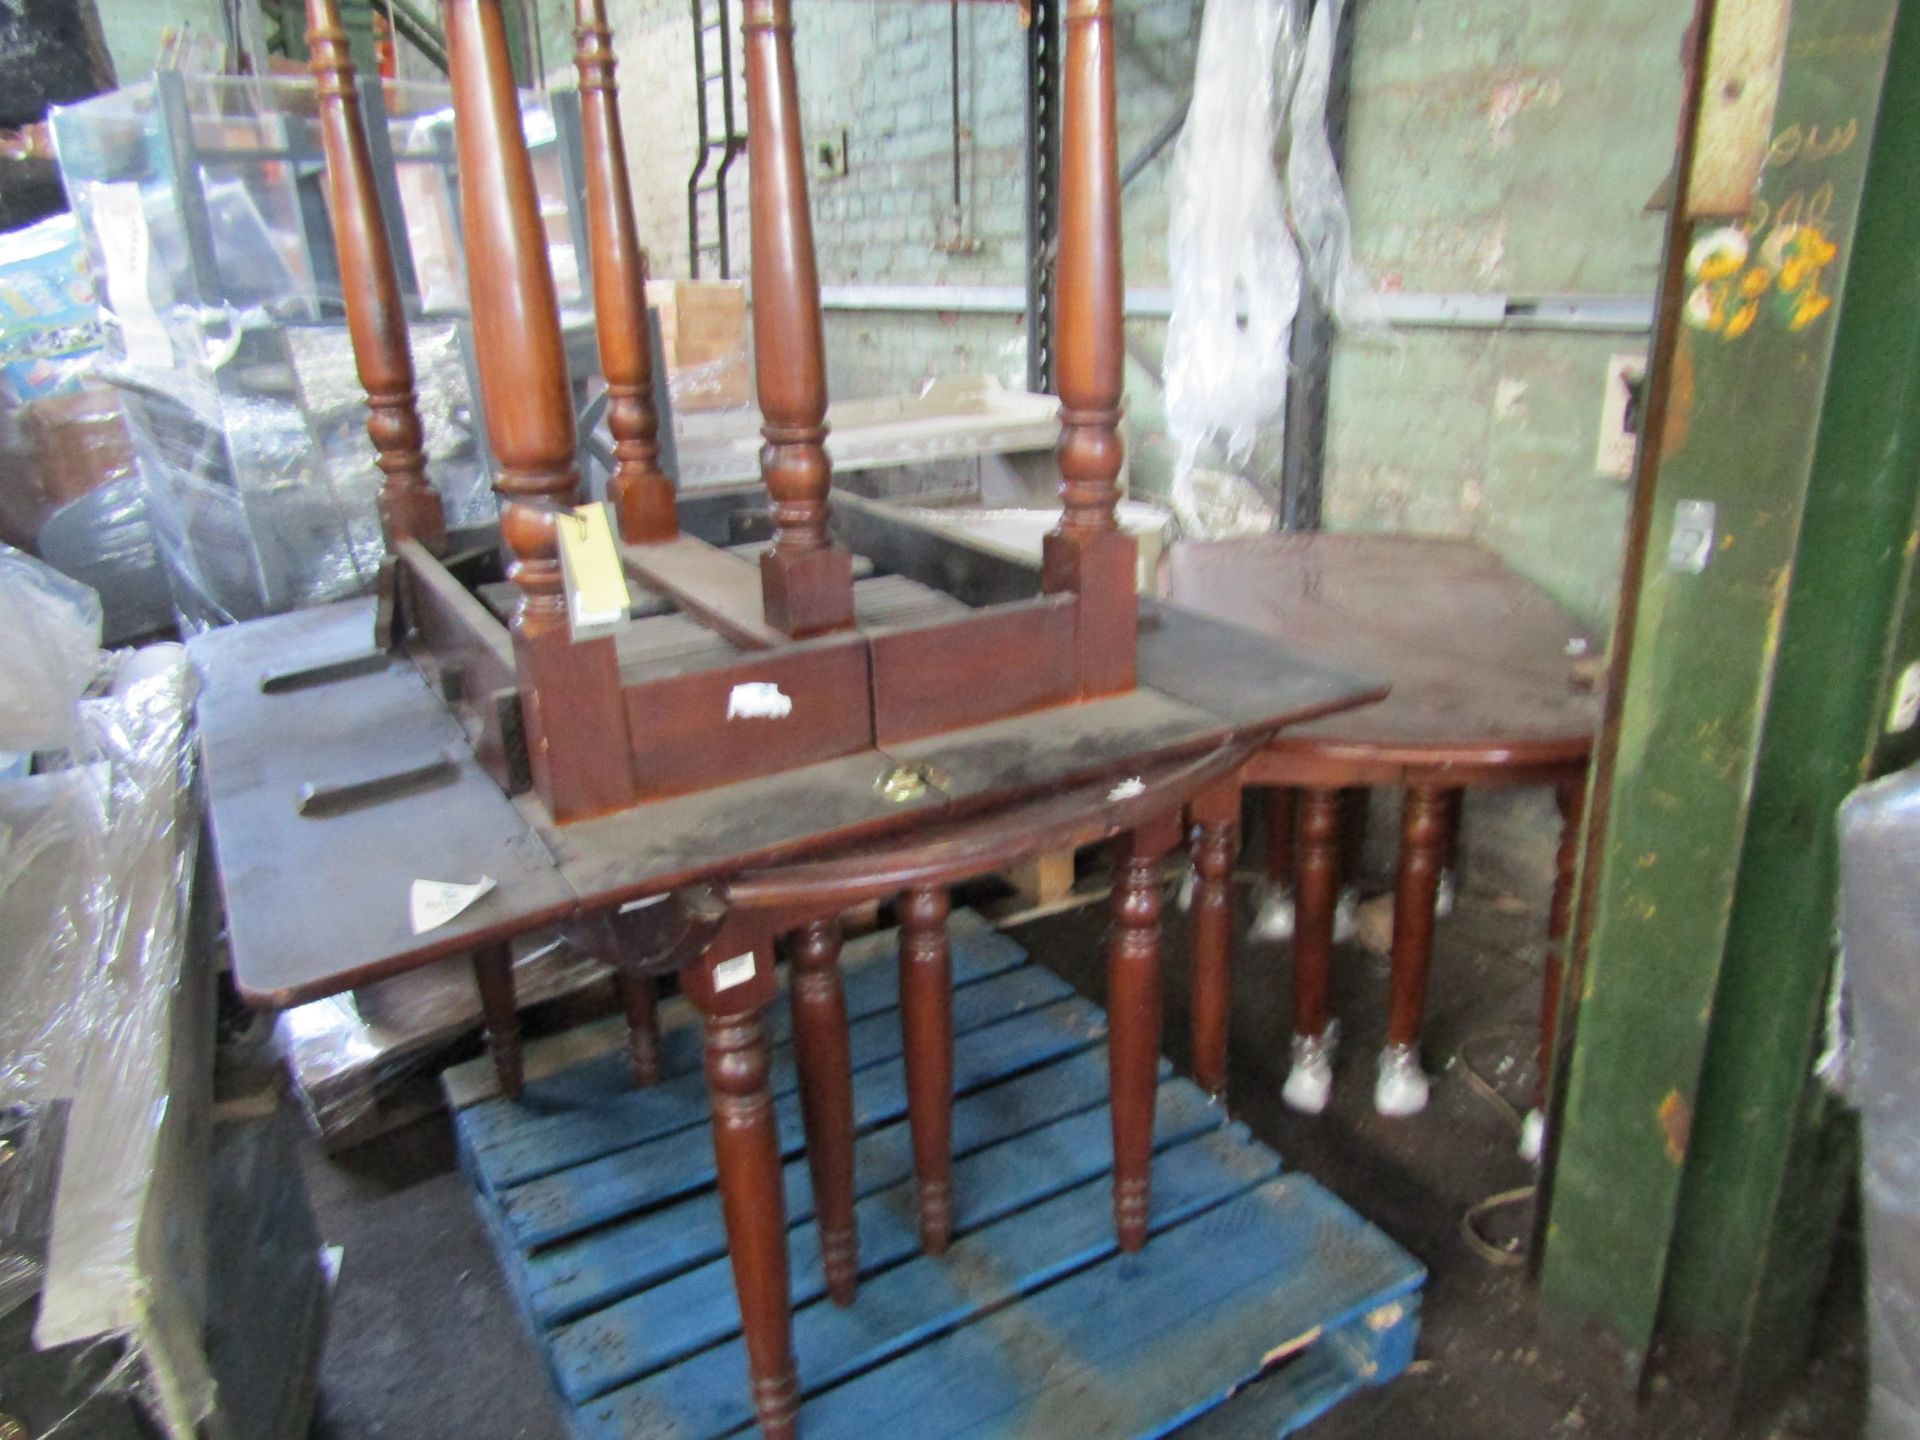 Pallet of 3 solid wood extending drop leaf dining tables. All need a sand down and varnish but are